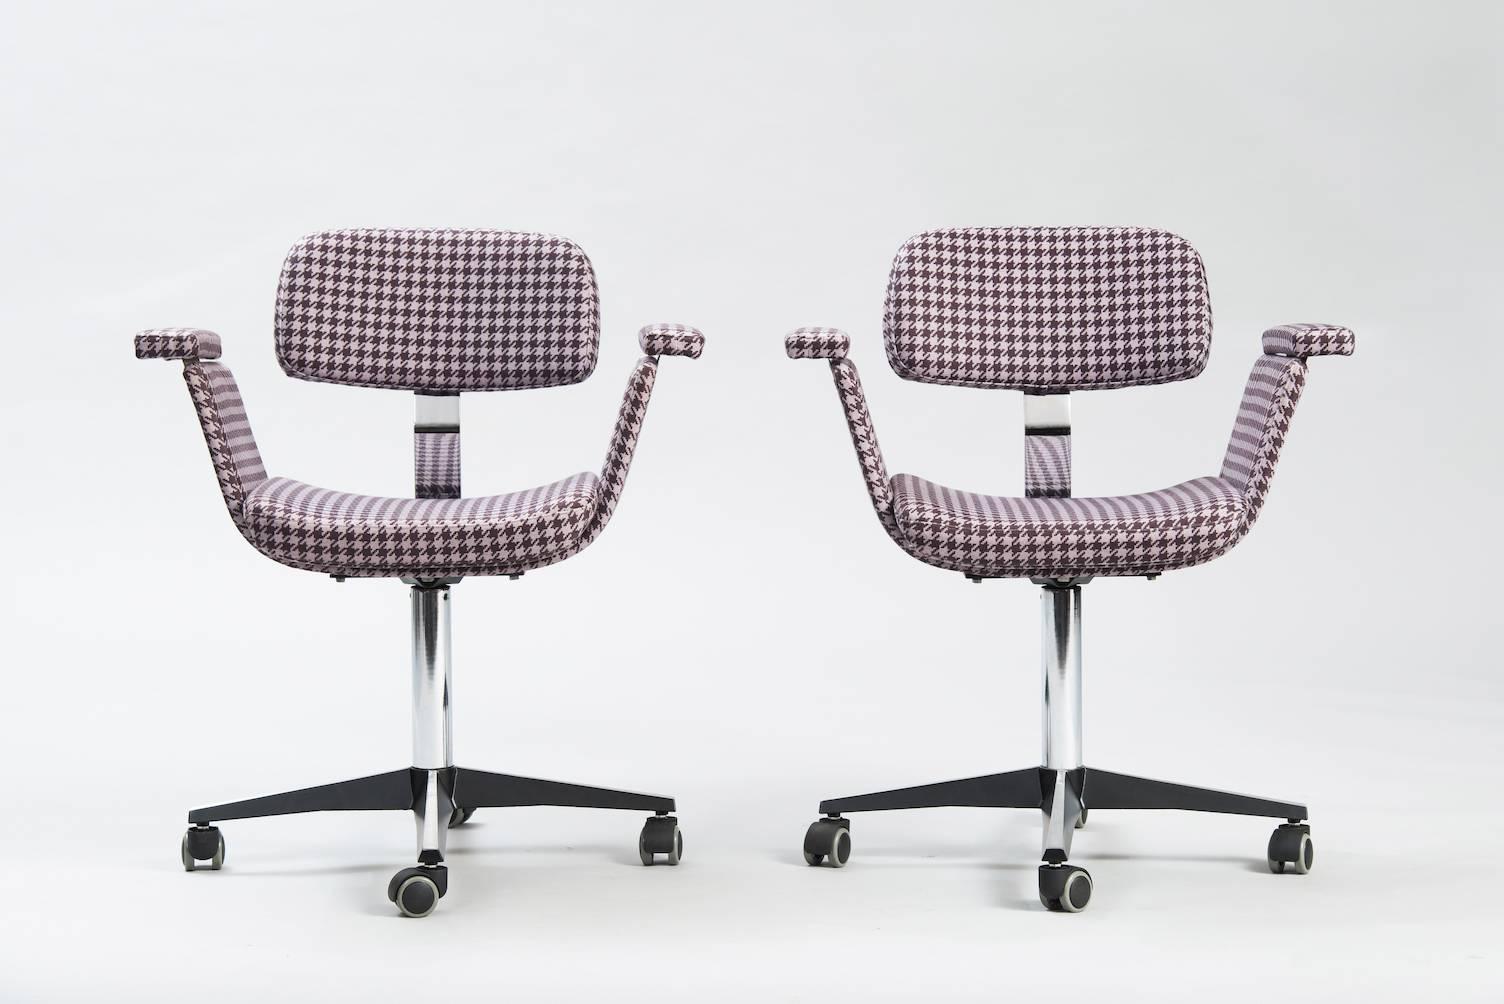 Pair of swivel desk chairs in chrome and aluminum, re-upholstered in a velvety fabric.
Can be sold separately.